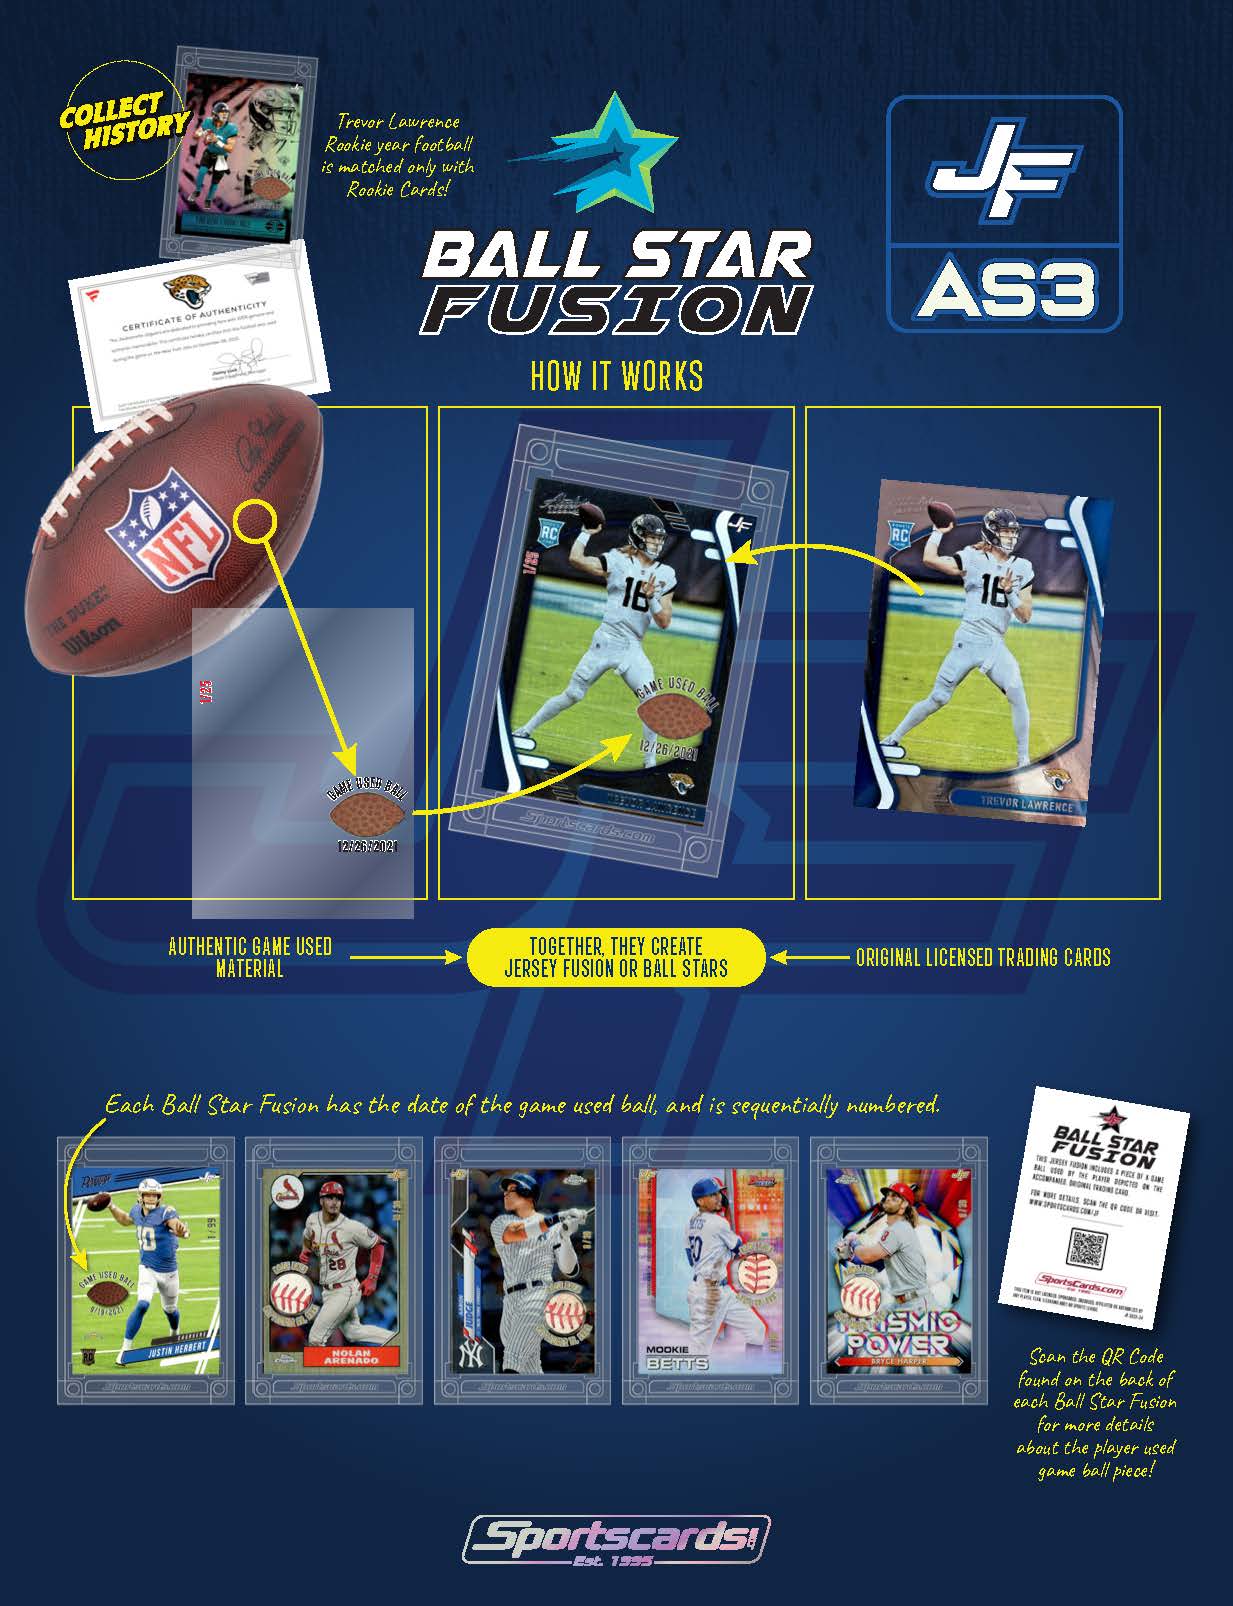 Jersey Fusion All Sports Series 3 Case - (100) Sealed Boxes Per Case